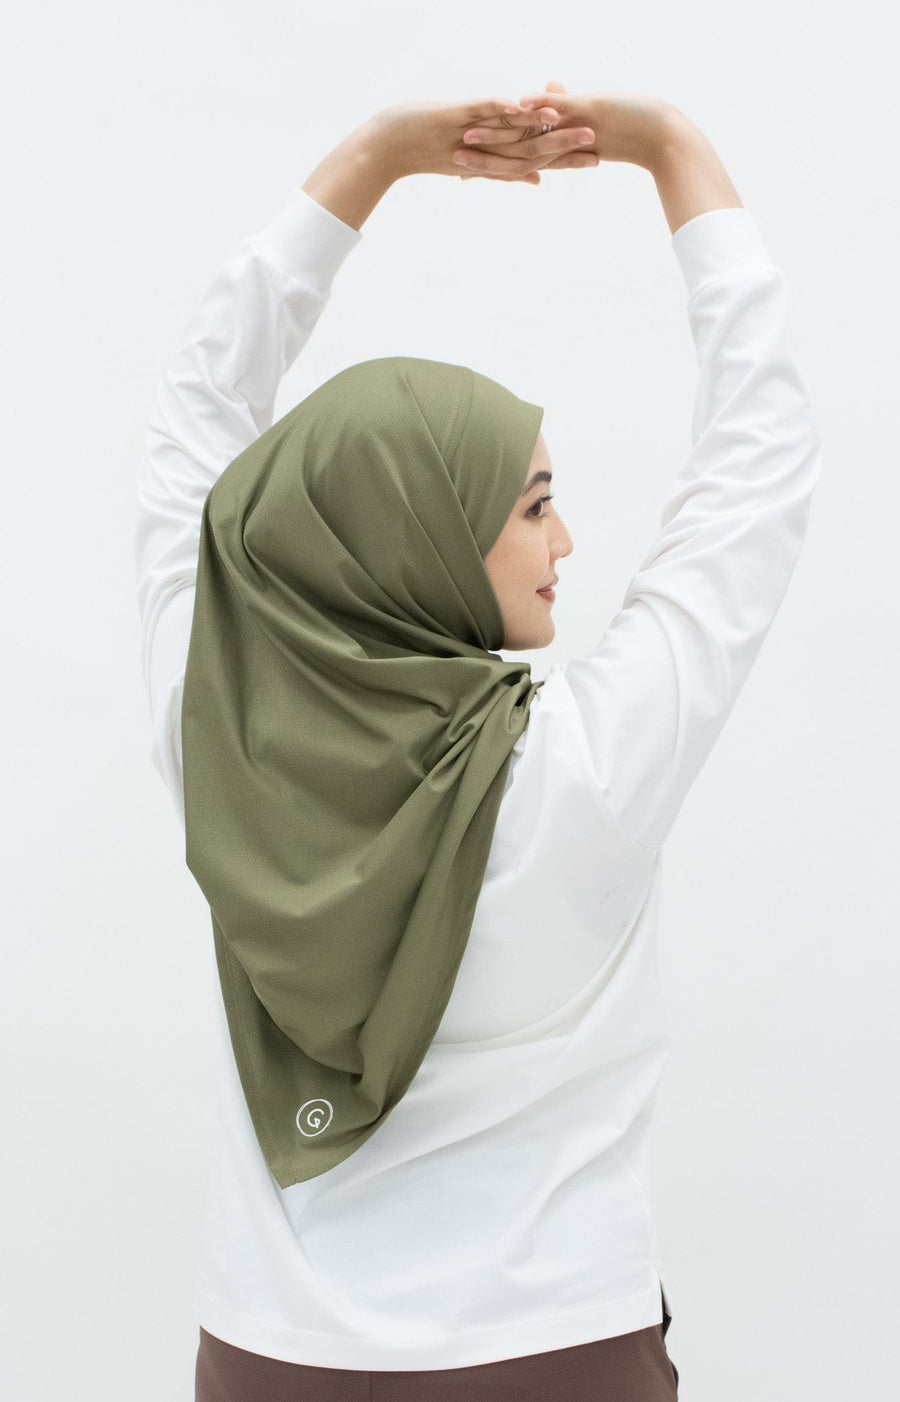 Sports Hijabs GLOWco Exclusive Tie Back Regular Shawl in Pale Olive